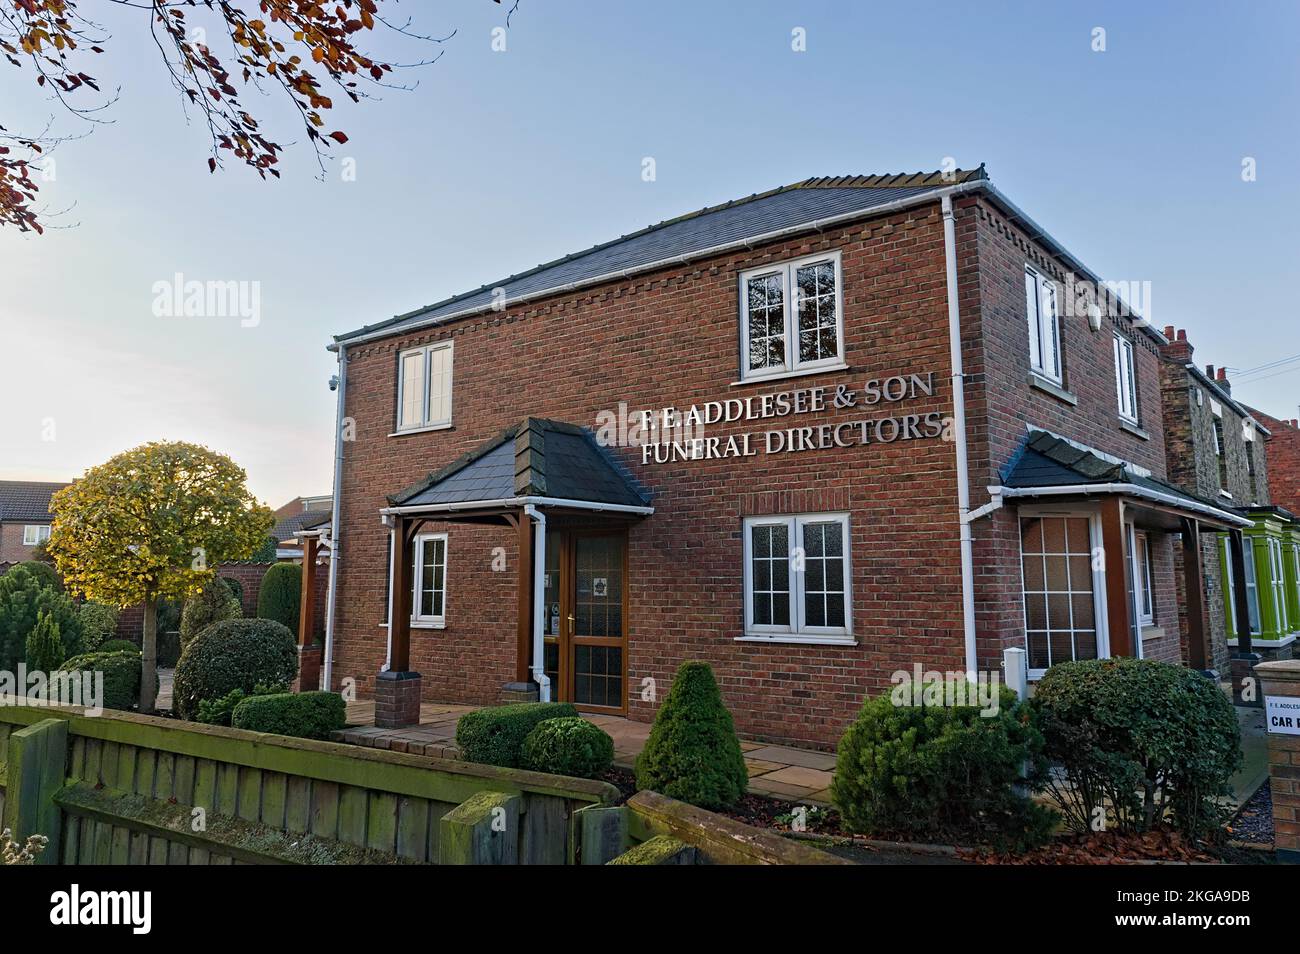 View of F.E Addlesee & Son Ltd, funeral home with surrounding gardens at sundown Stock Photo